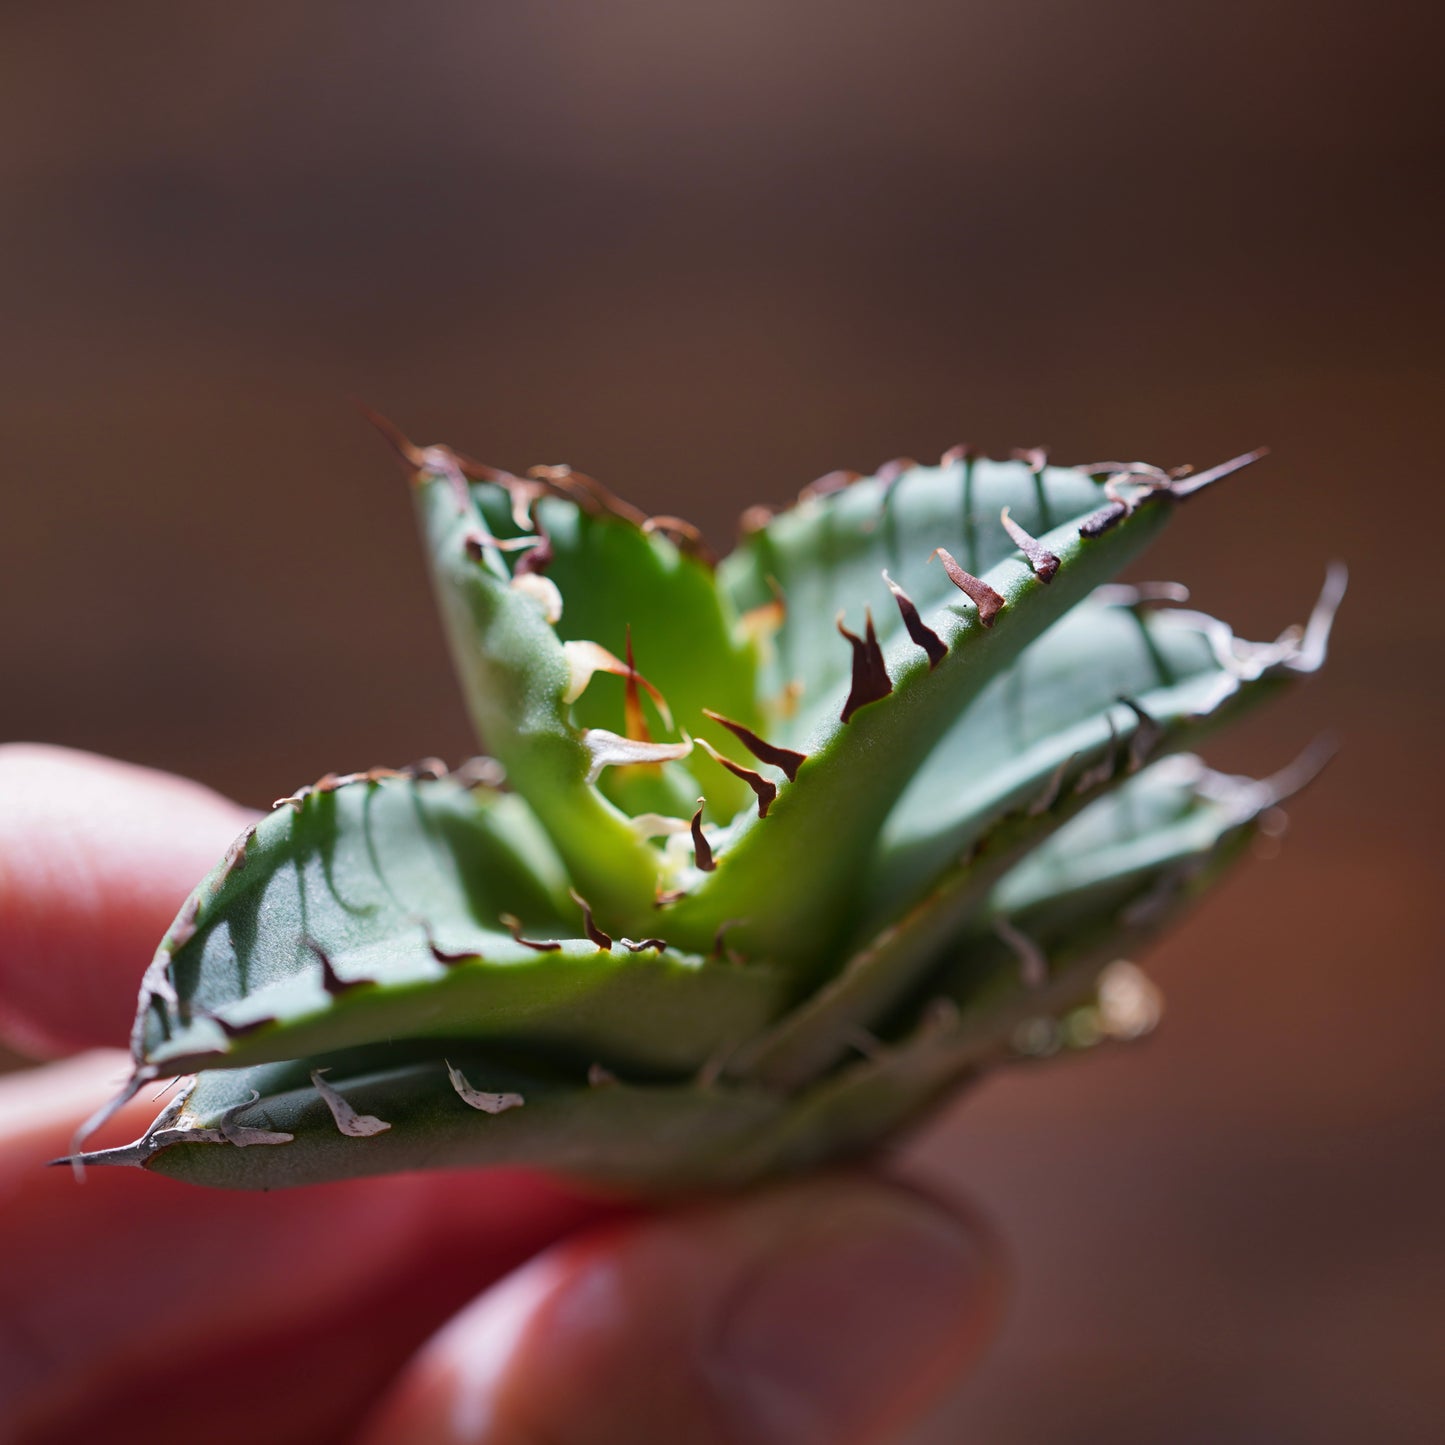 【From lize gardening】Agave titanota ’Crab(螃蟹)’ Baby No.2